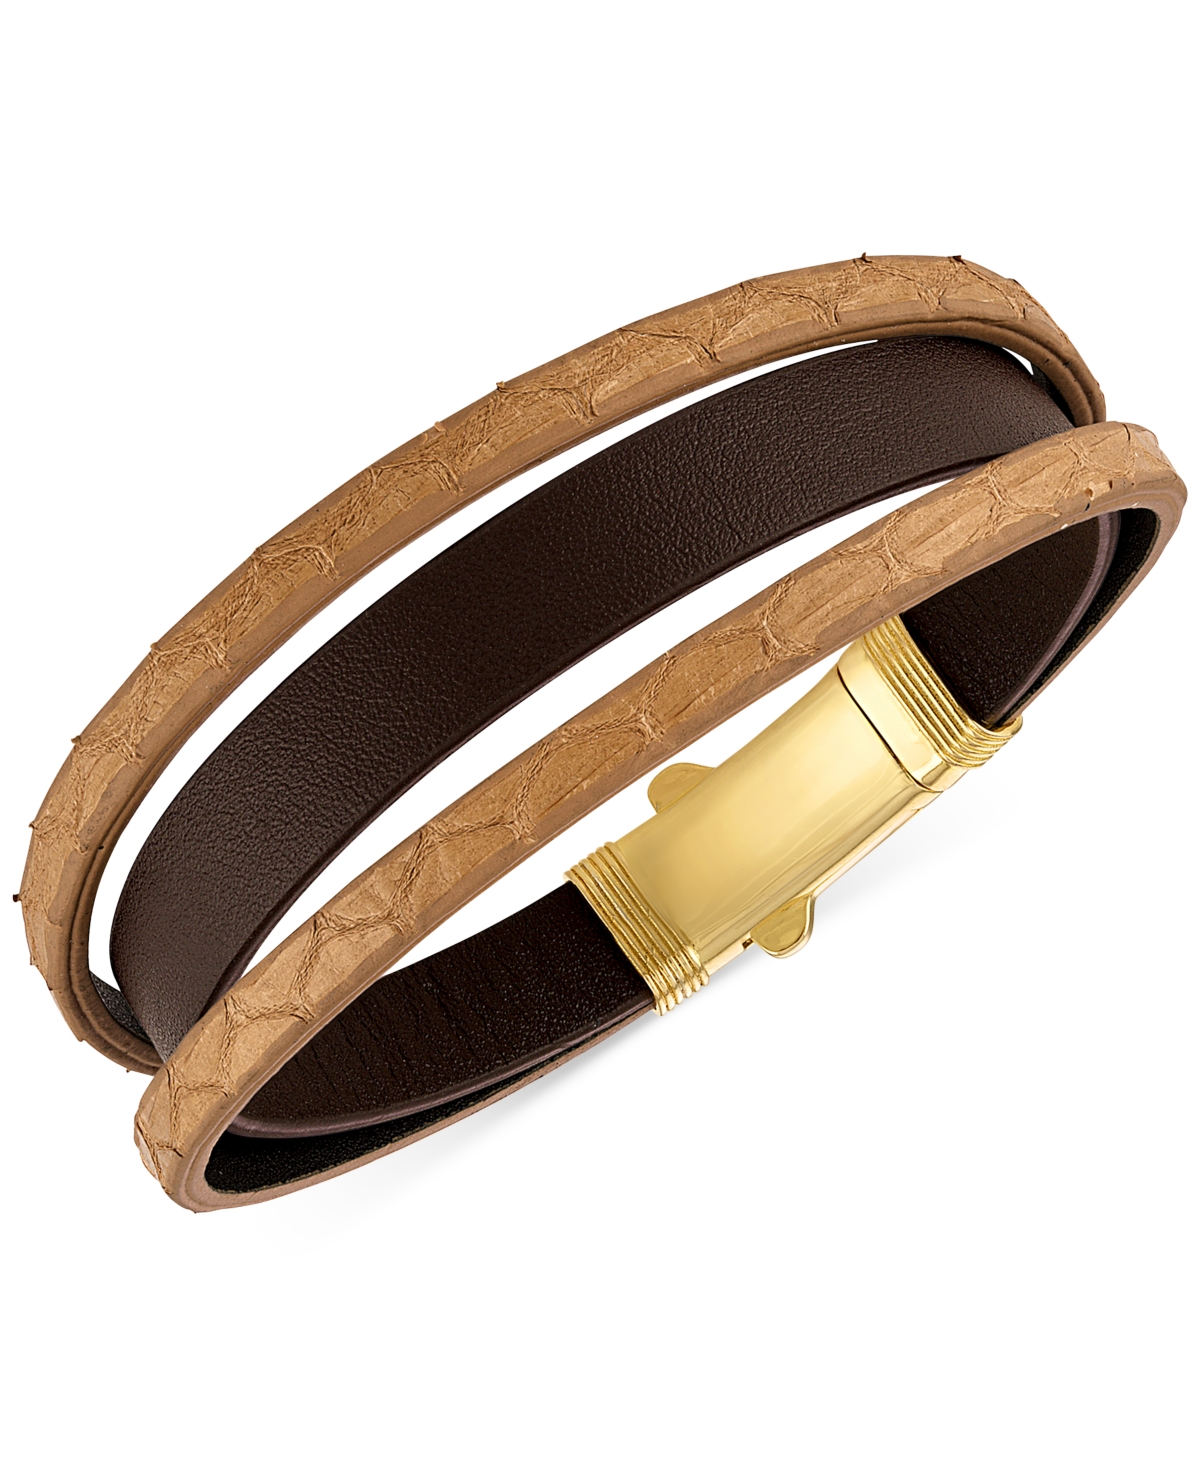 Esquire Men's Jewelry Two-tone Triple Strap Leather Layered Bracelet In 18k Gold-plated Sterling Silver, Created For Macy' In Brown/gold